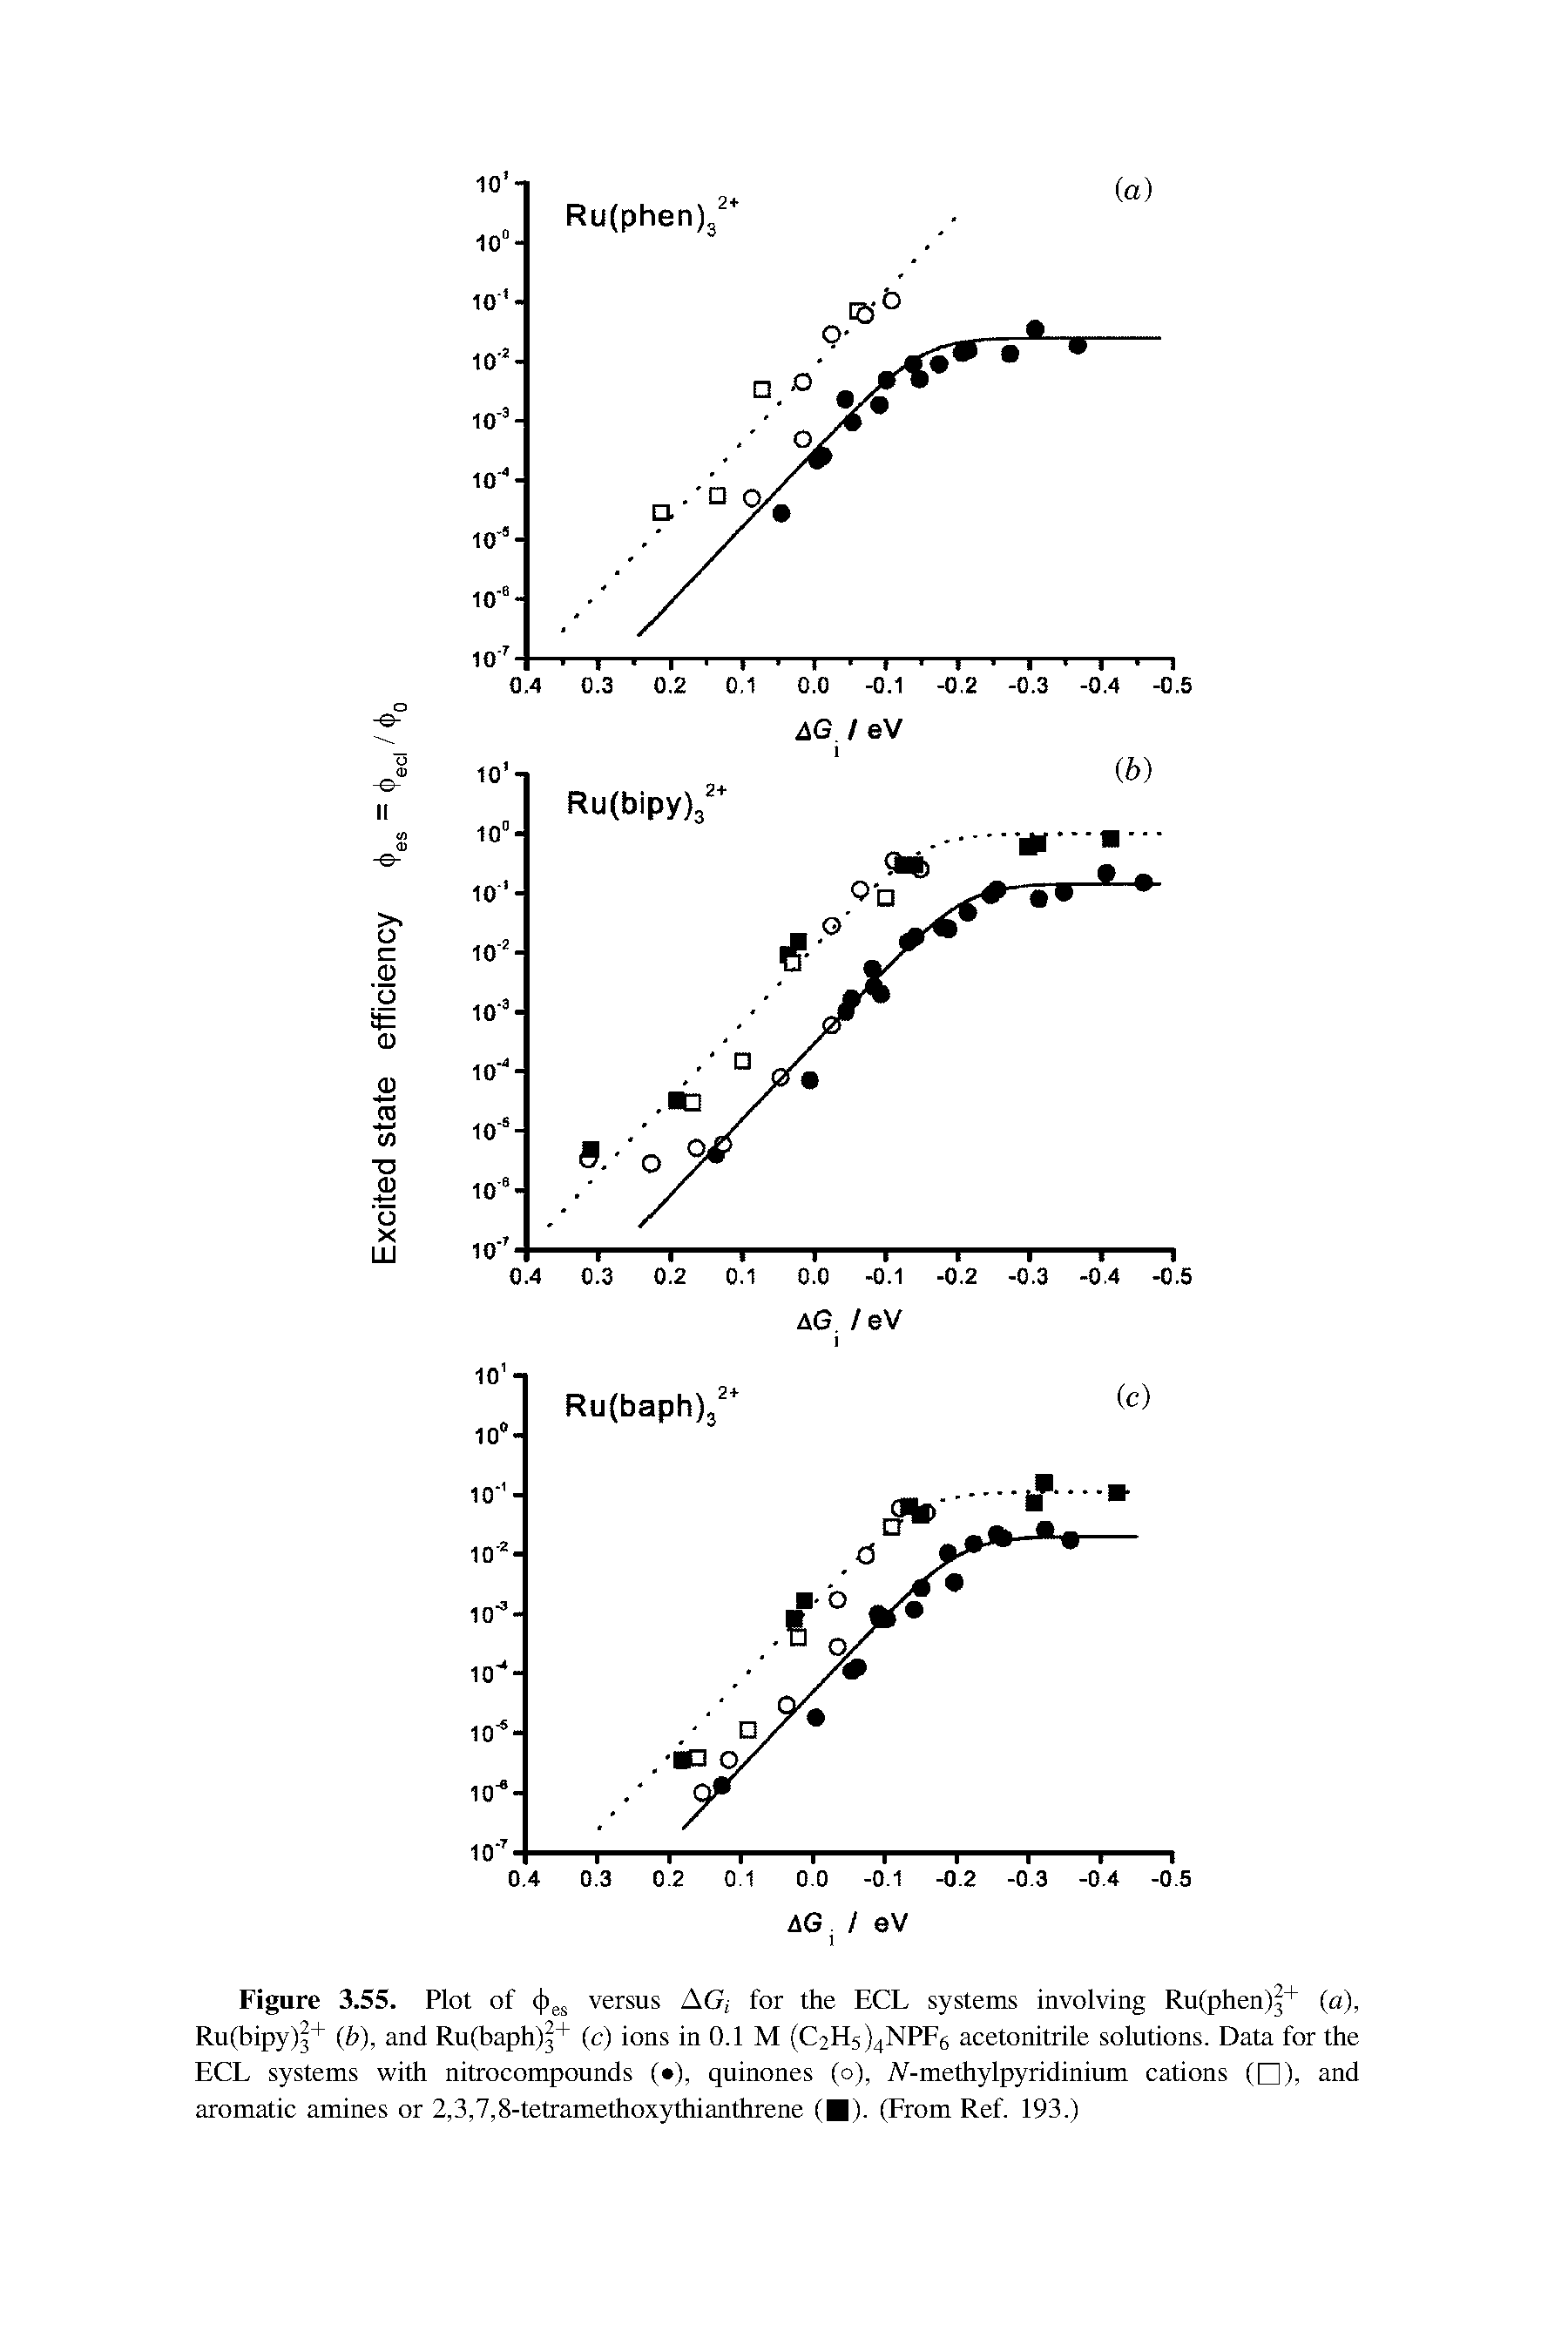 Figure 3.55. Plot of cf)es versus AG for the ECL systems involving Ru(phen)3+ (a), Ru(bipy)3+ (b), and Ru(baph)3+ (c) ions in 0.1 M (C2H5)4NPF6 acetonitrile solutions. Data for the ECL systems with nitrocompounds ( ), quinones (o), iV-methylpyridinium cations ( ), and aromatic amines or 2,3,7,8-tetramethoxythianthrene ( ). (From Ref. 193.)...